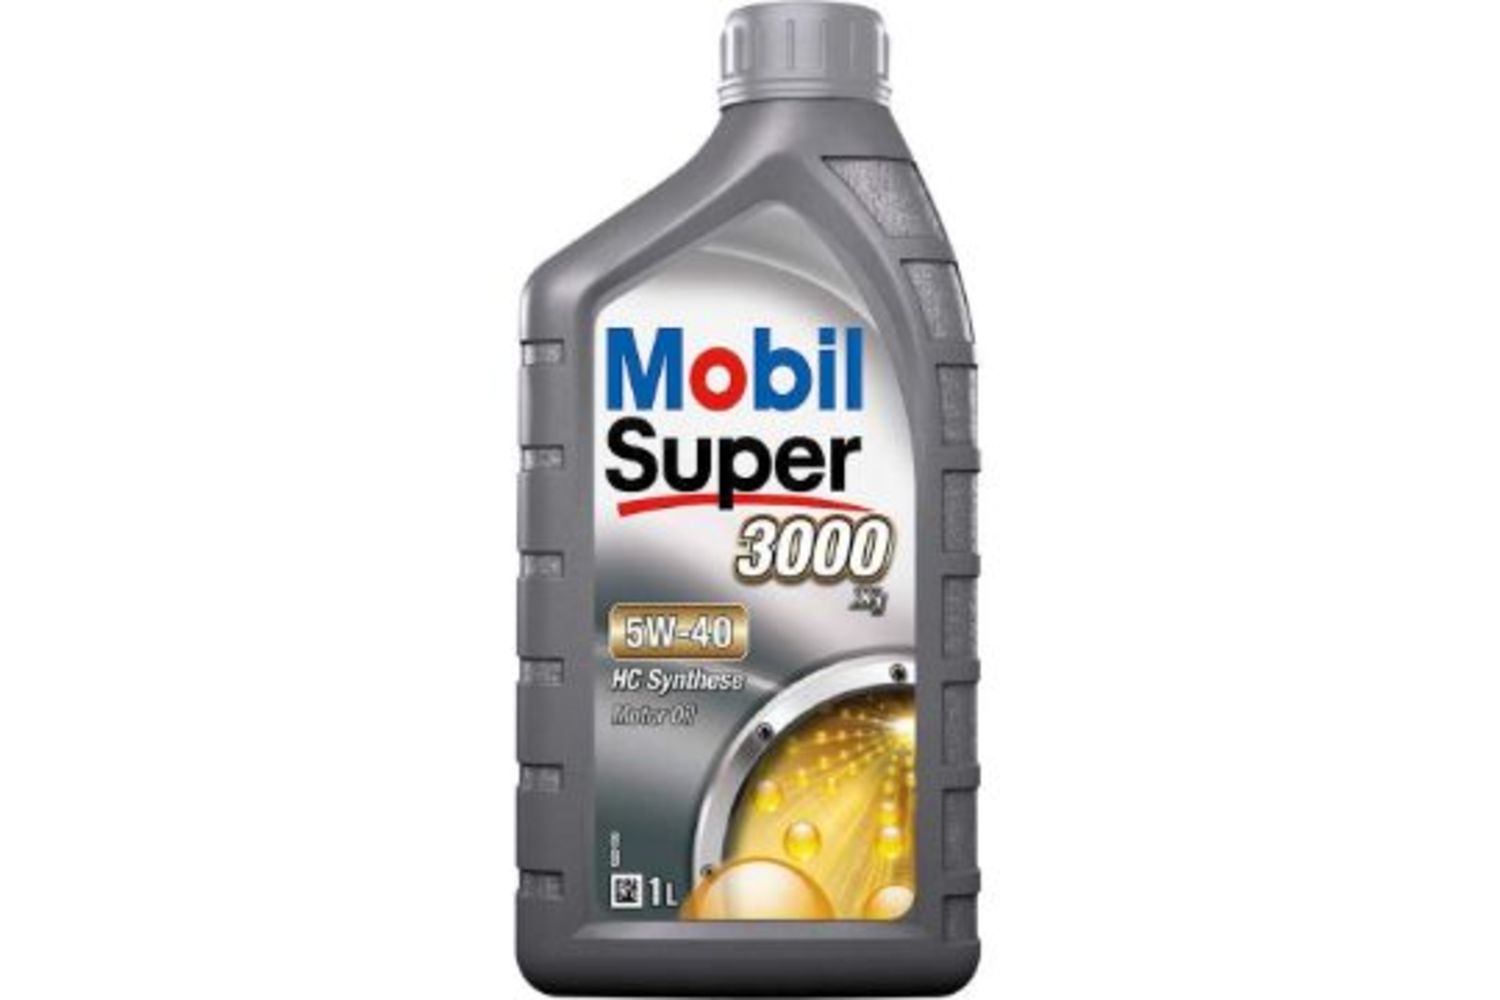 15 Pallets of Mobil Super 3000 5W-40 HC Synthese Motor Oil 1L